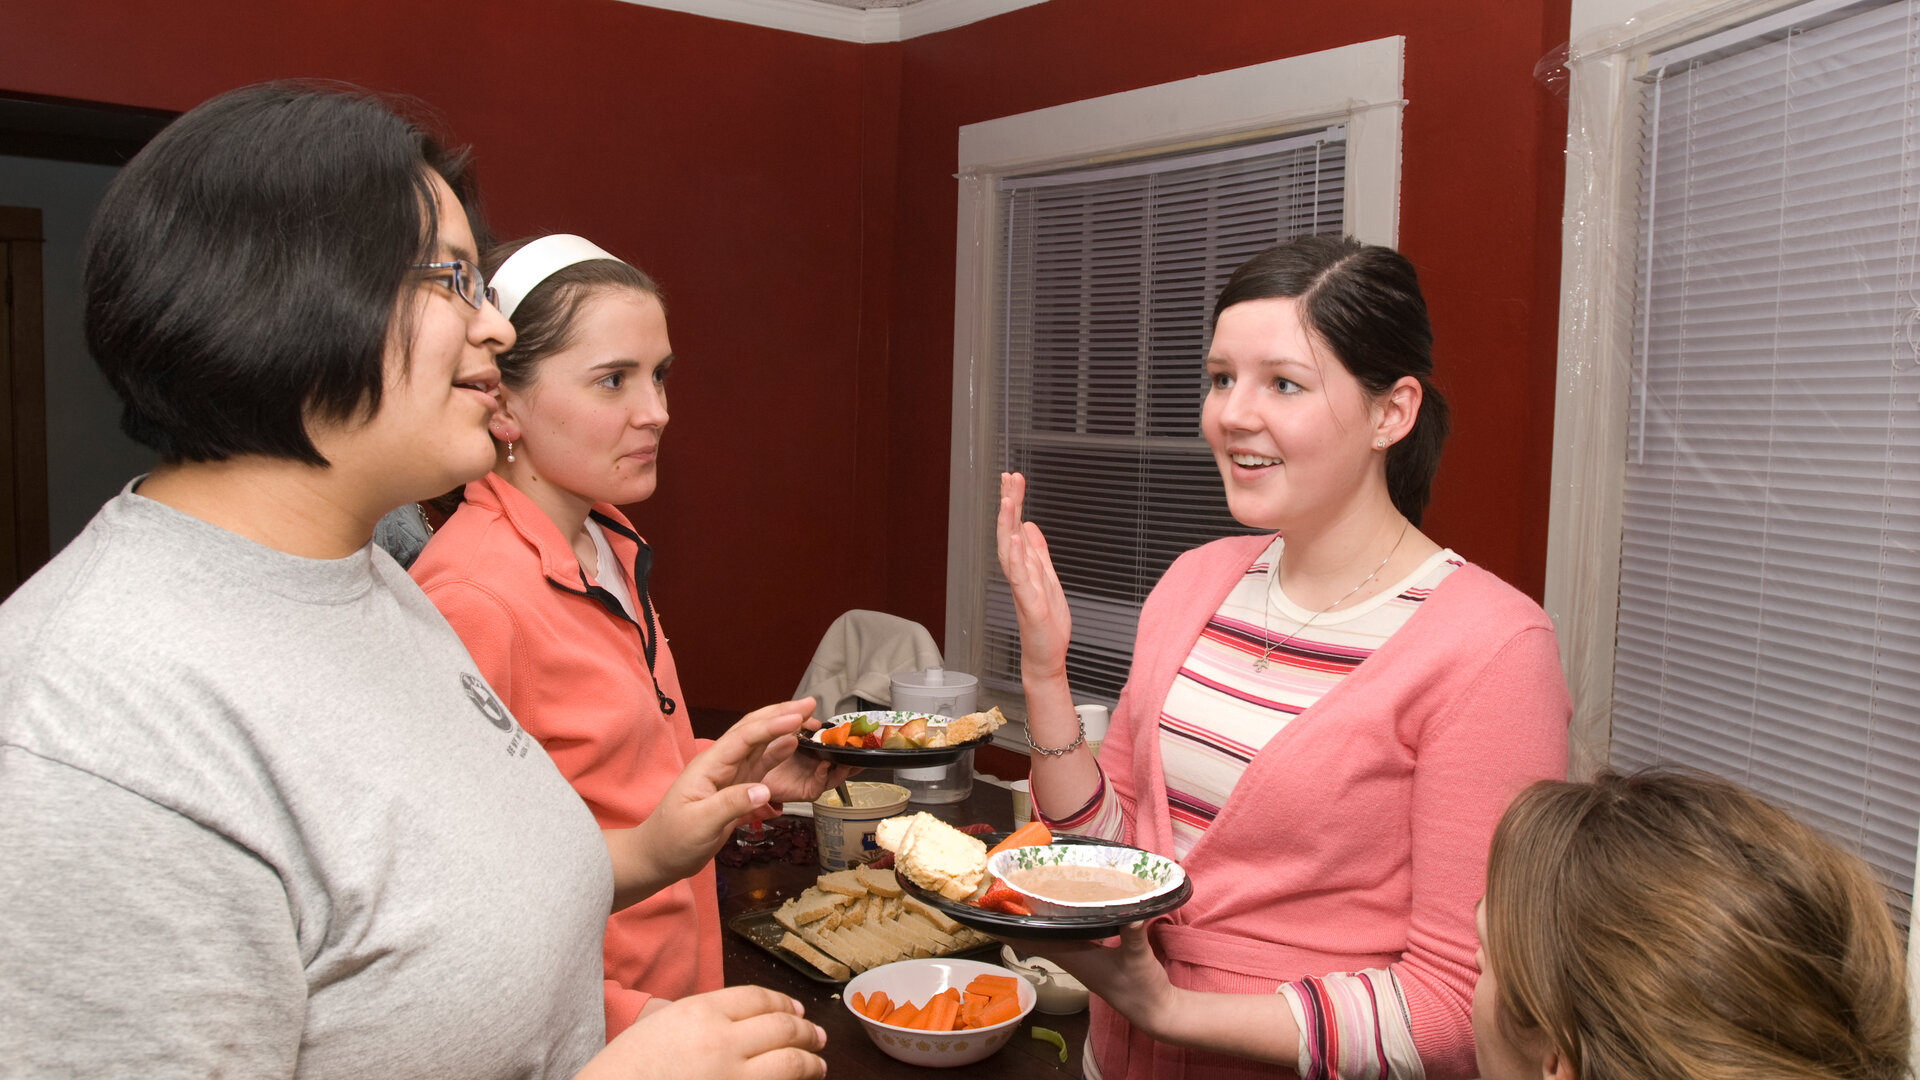 students eat dinner over conversation